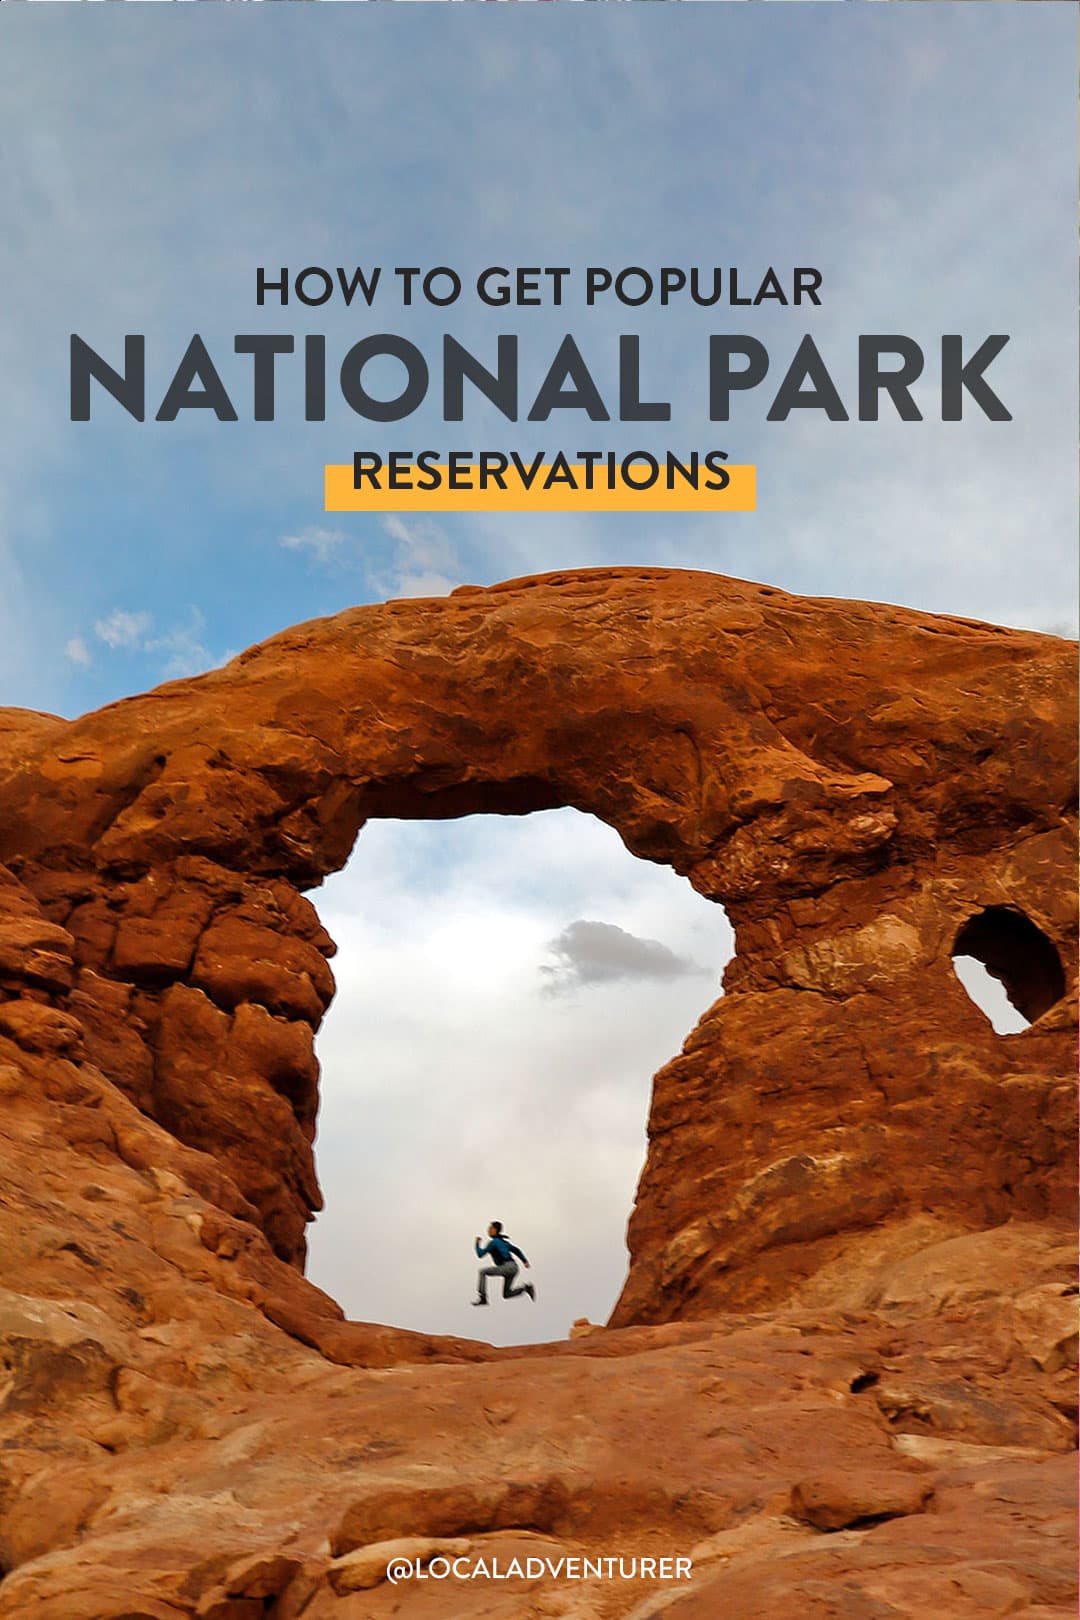 which national parks require reservations and how to get them